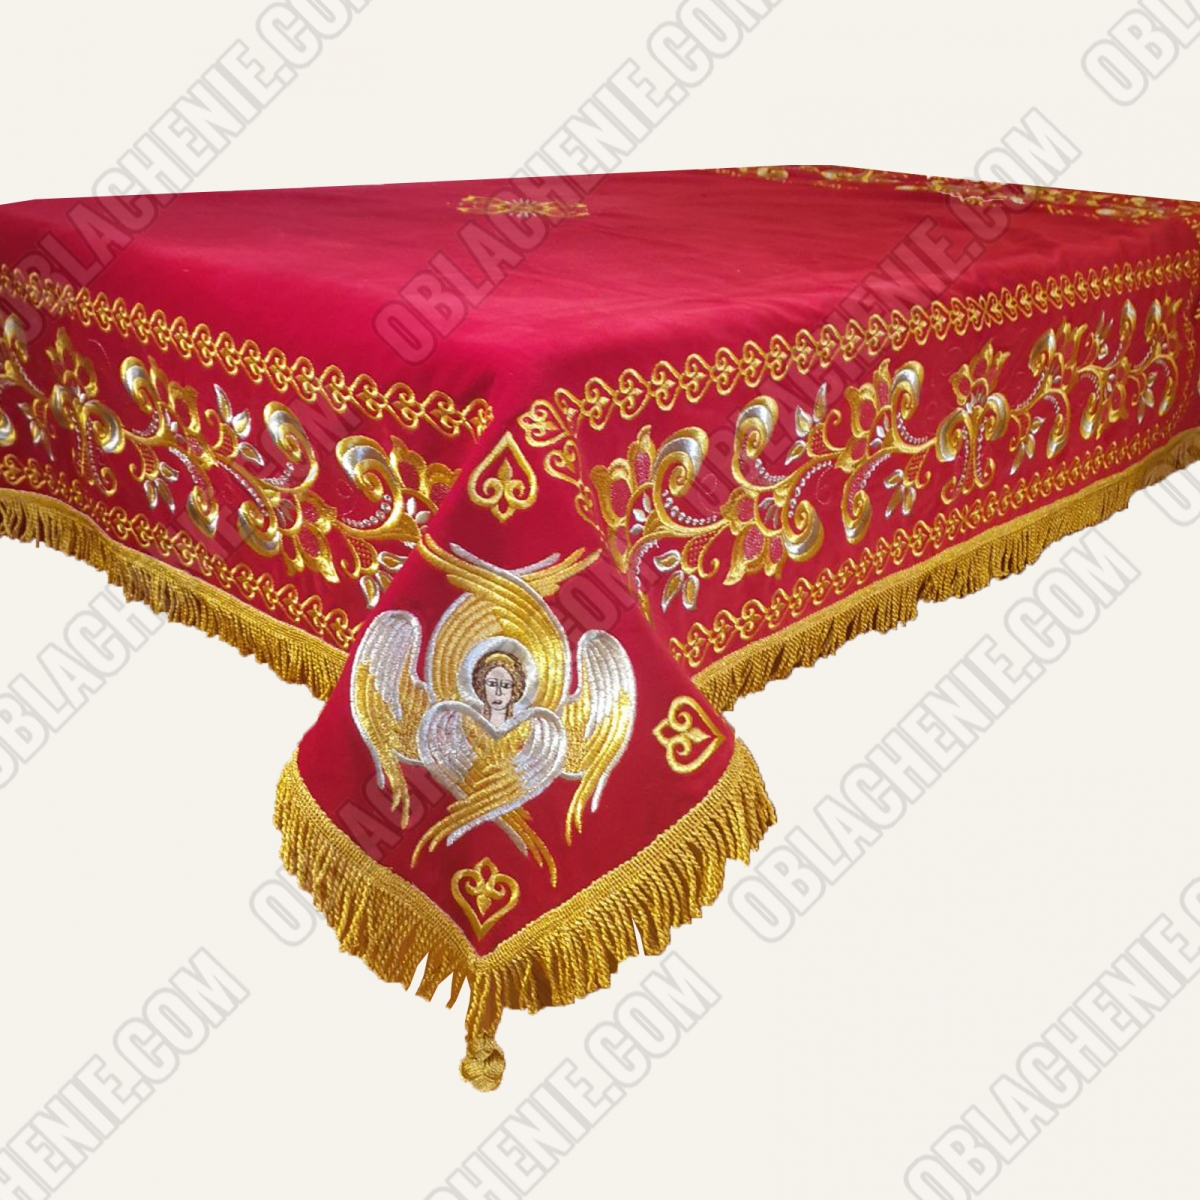 HOLY TABLE VESTMENTS 11371